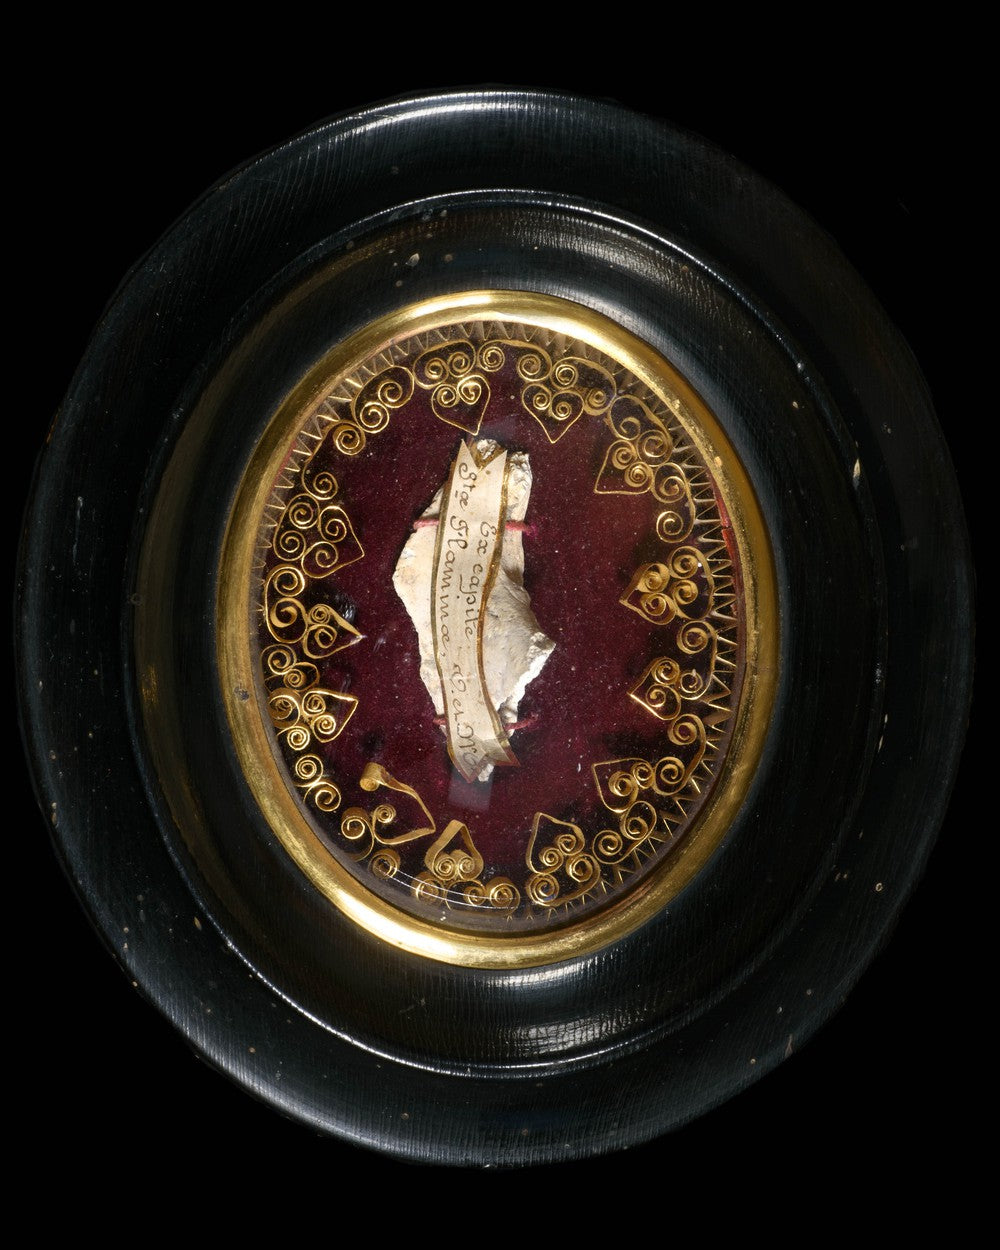 RELIQUARY, RELIC OF THE SKULL OF SAINT FLAMINE - RELICS